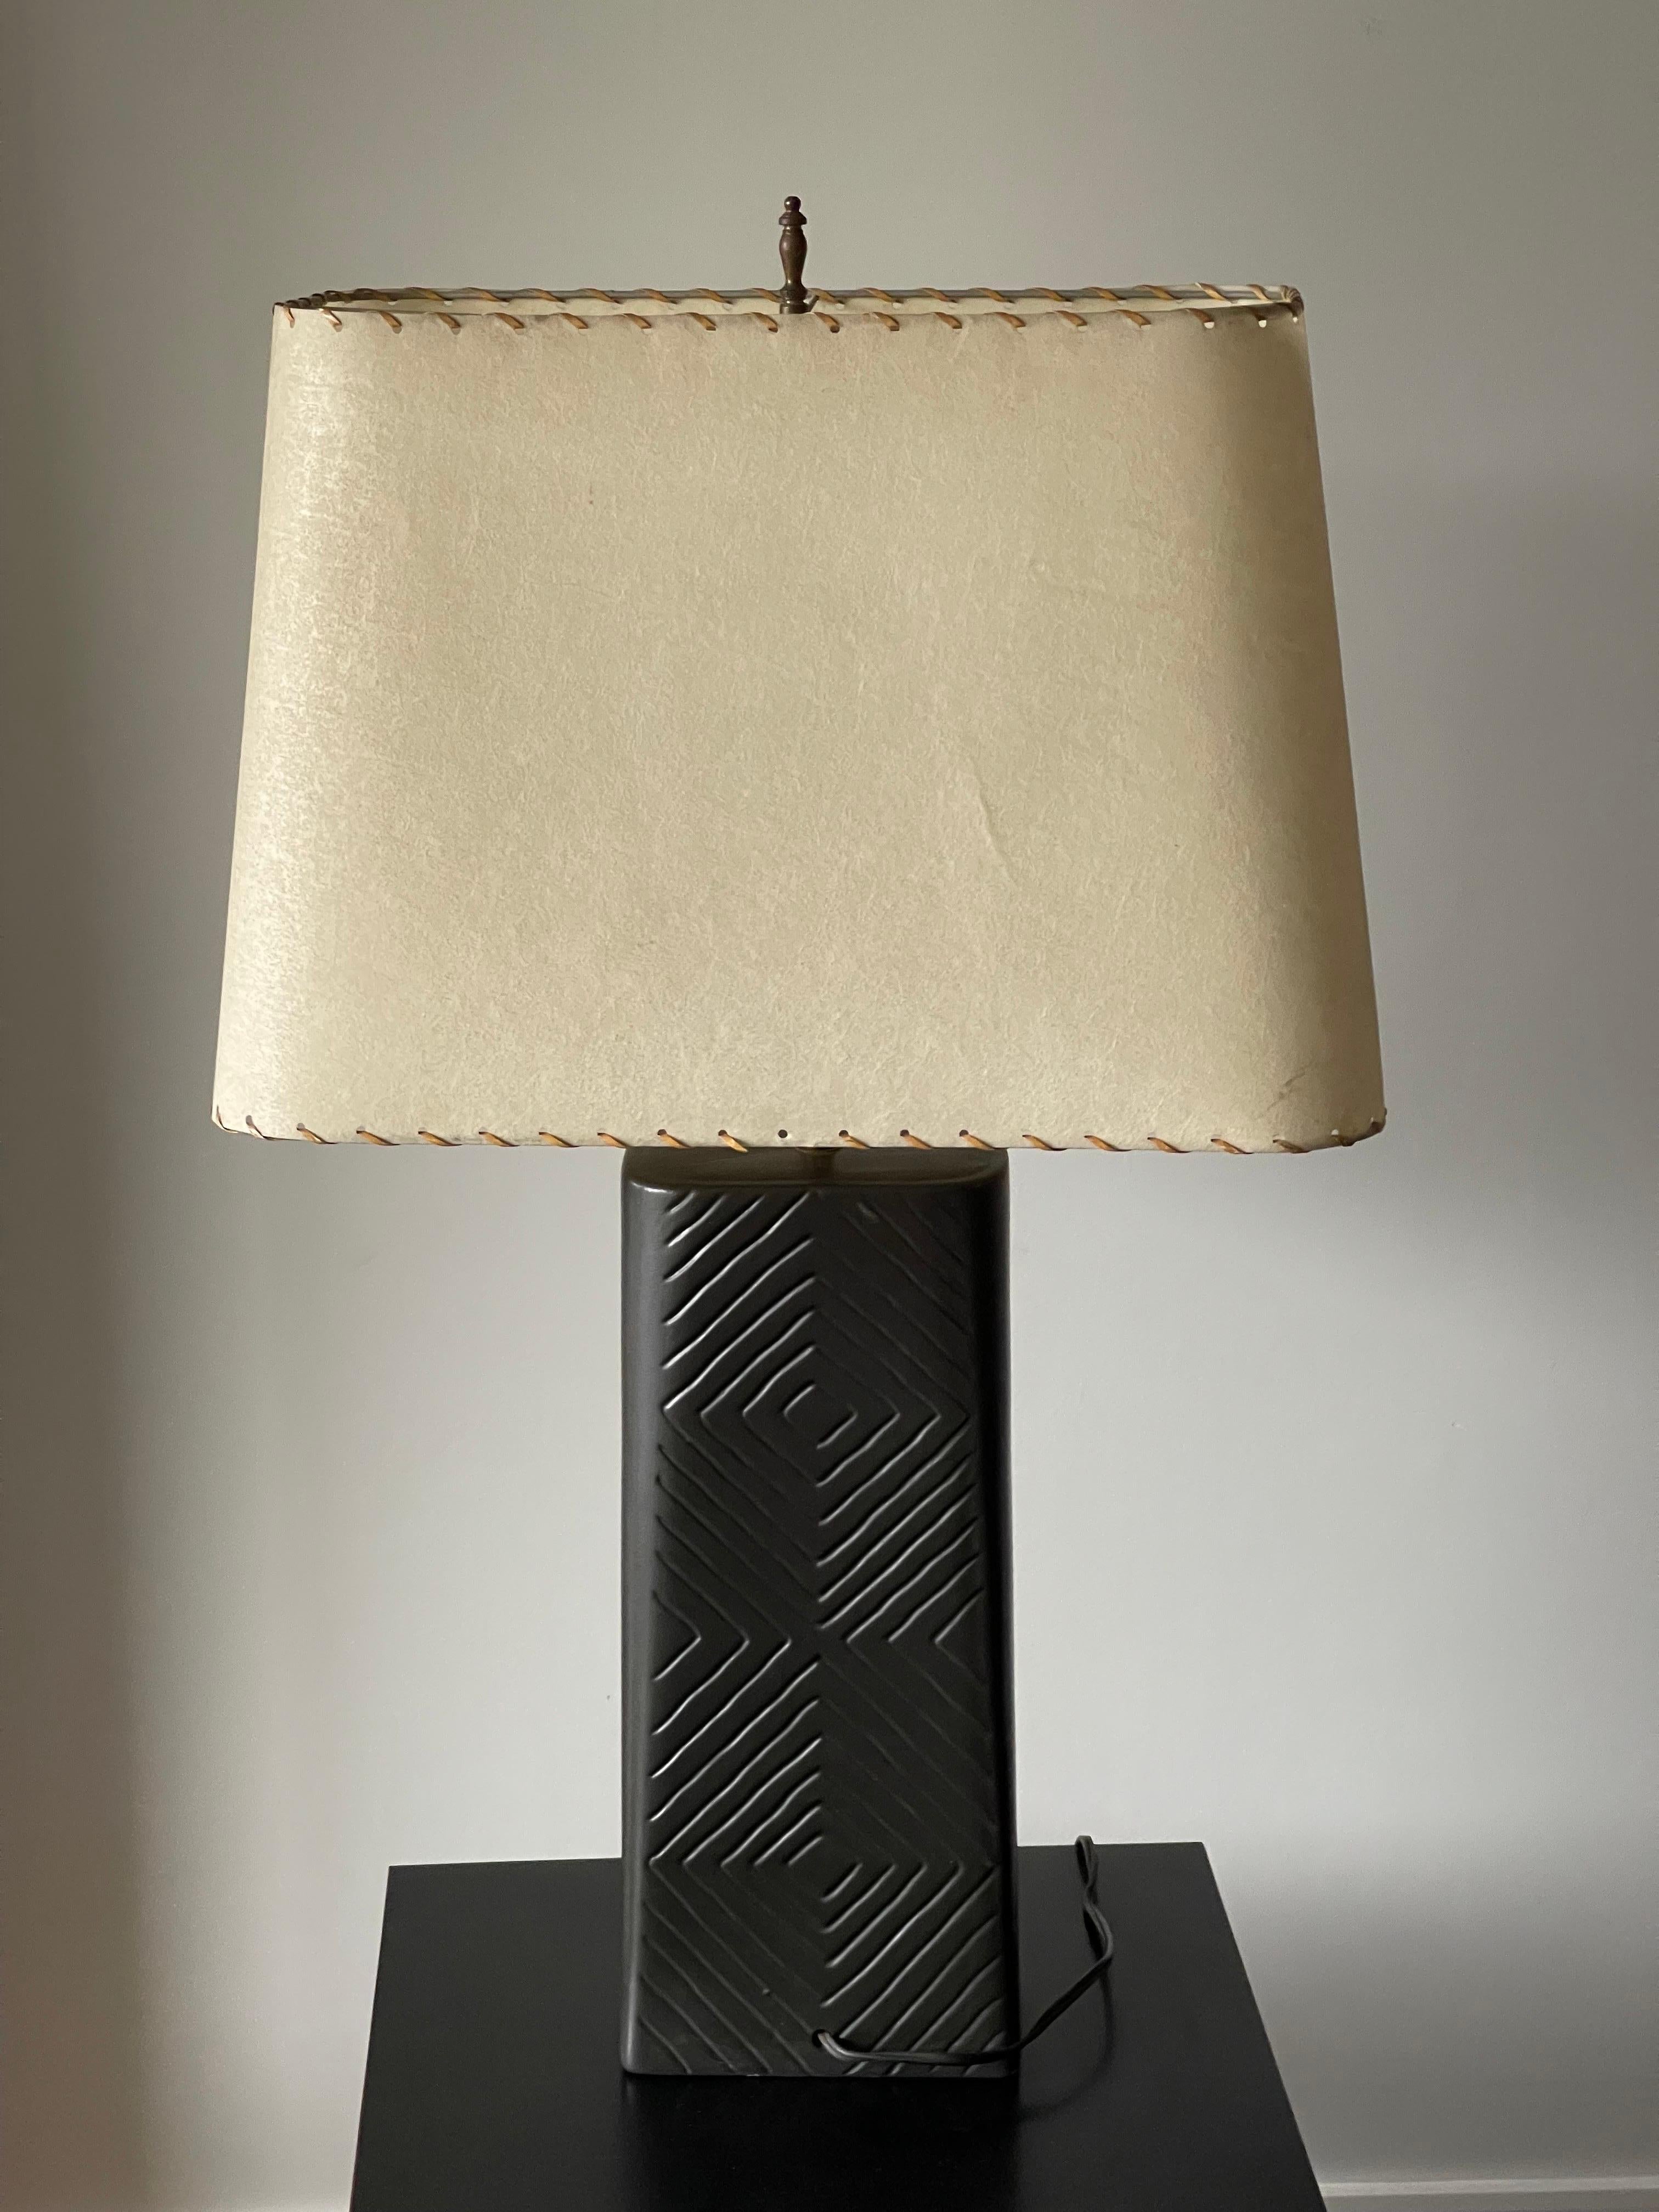 Large Mid-Century Modern Ceramic Table Lamp with Original Shade  For Sale 6